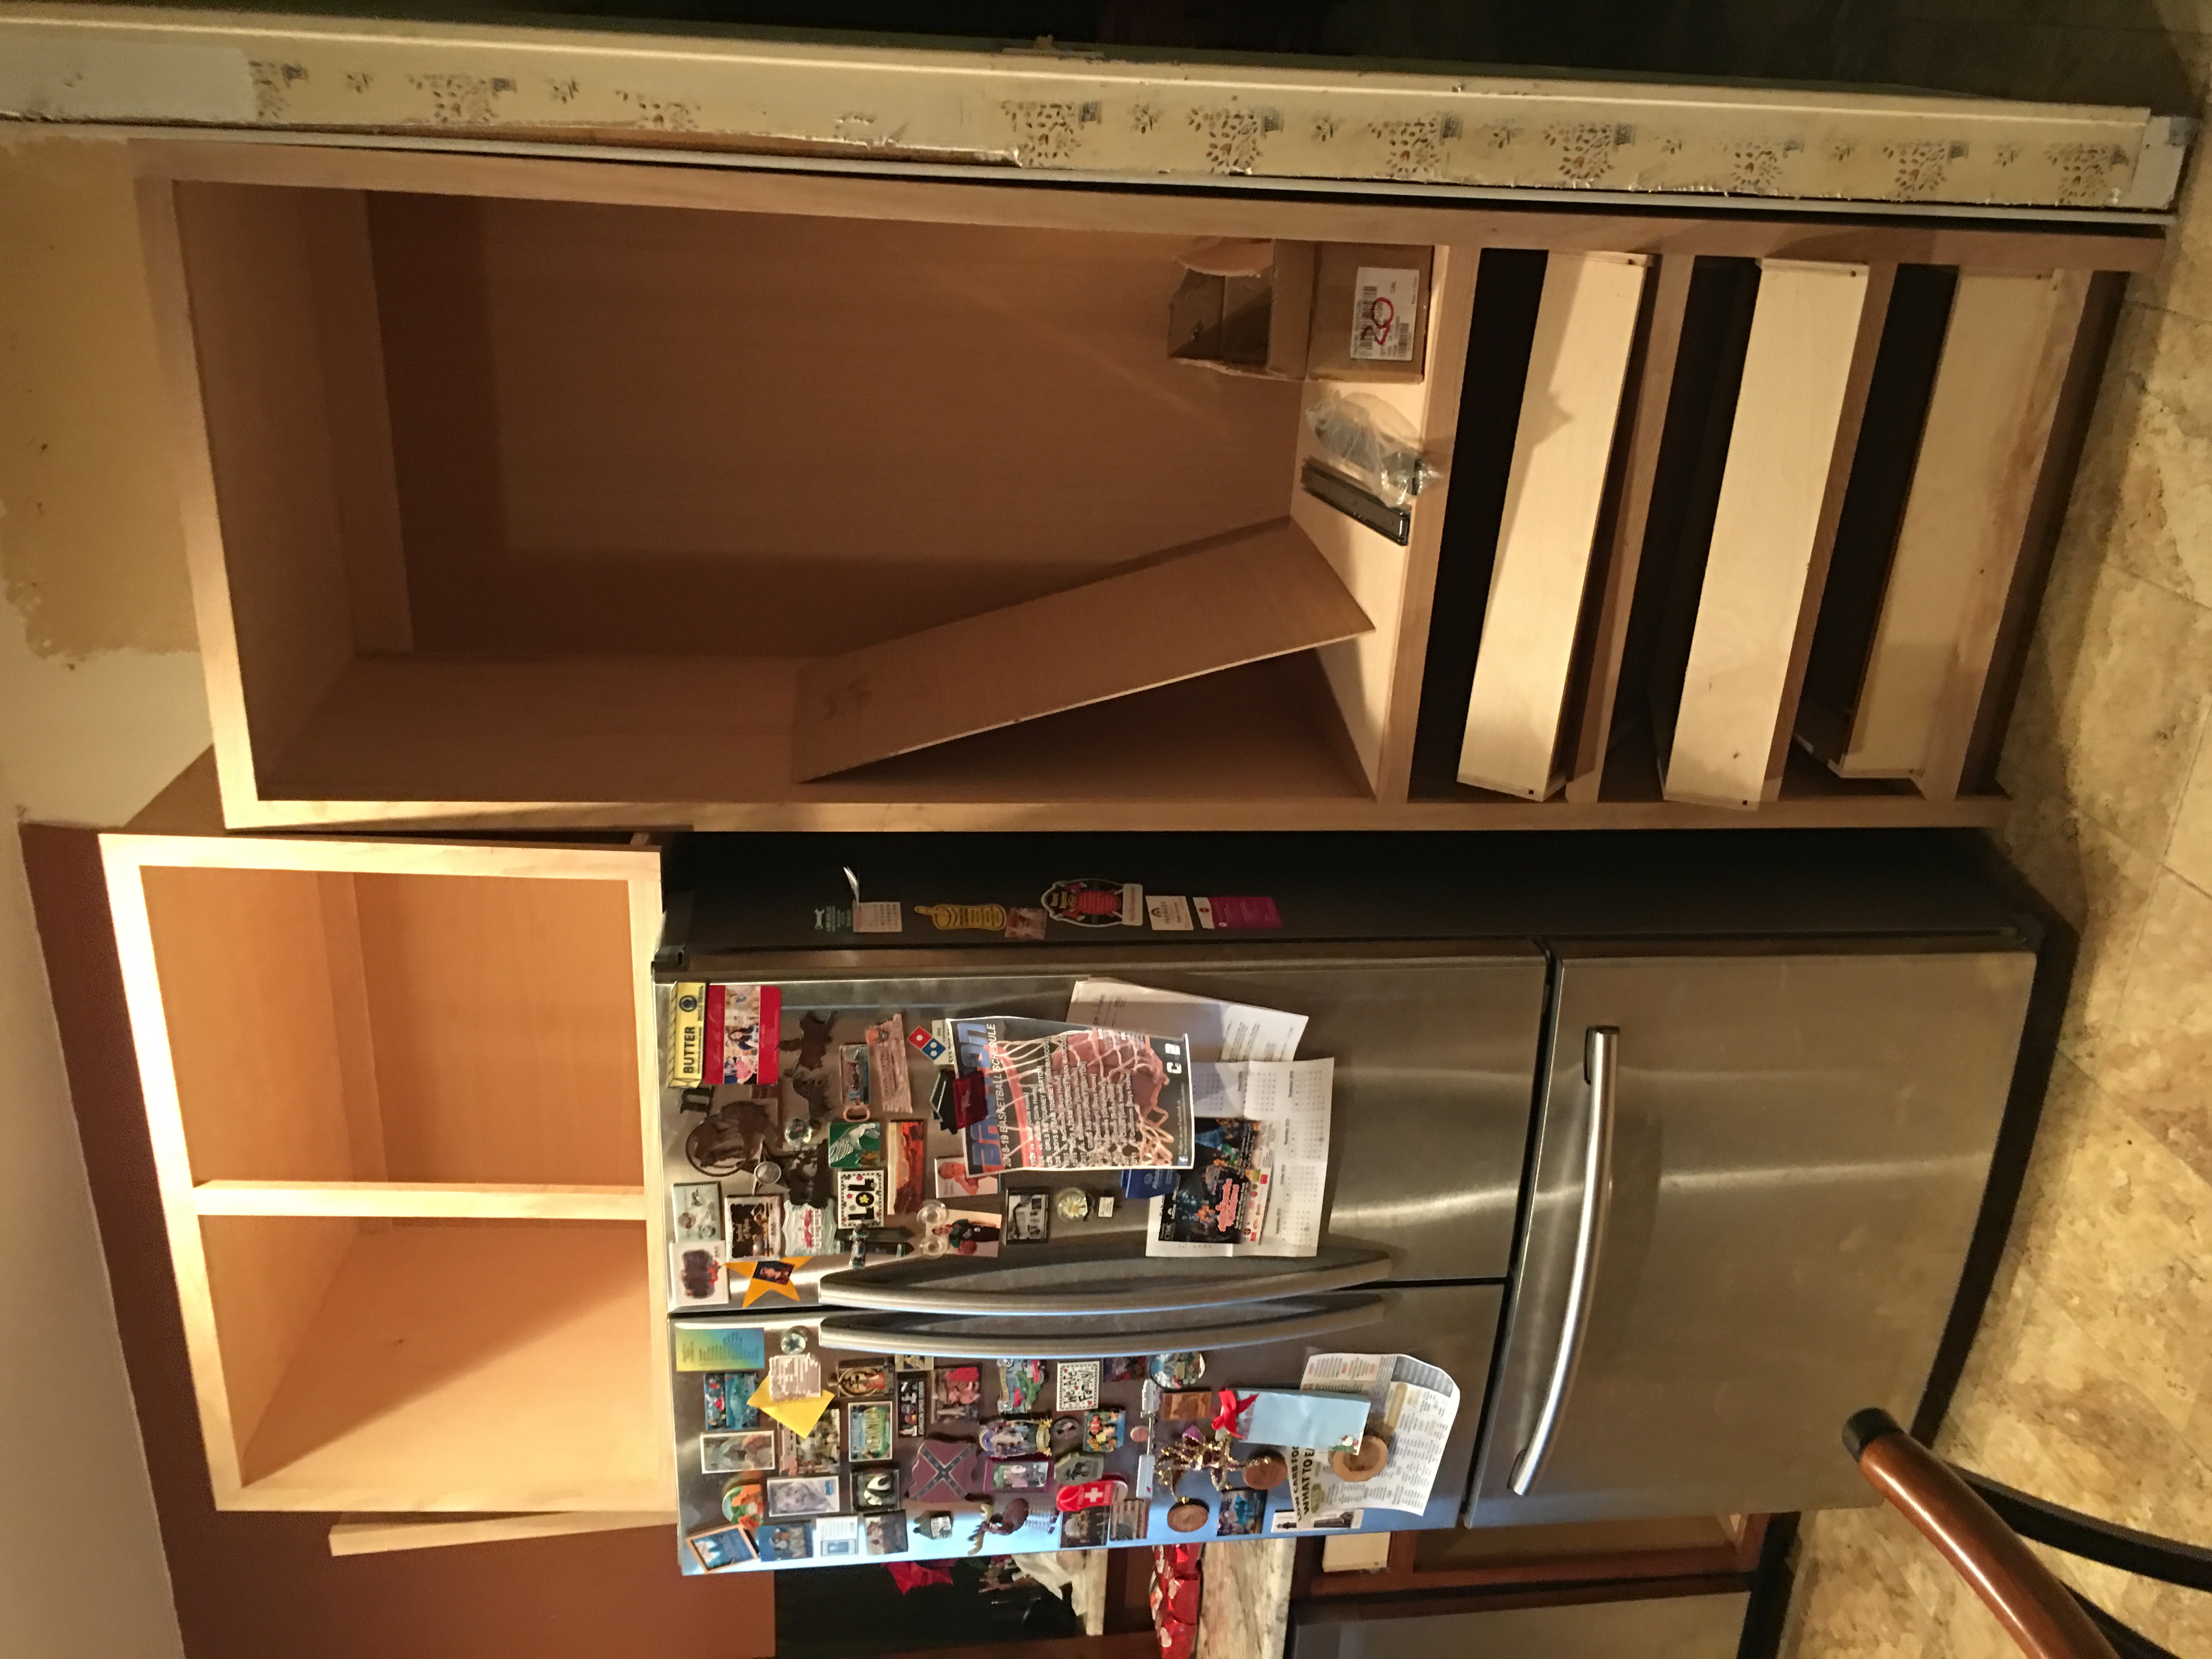 Pantry and over fridge cabinets - not correct